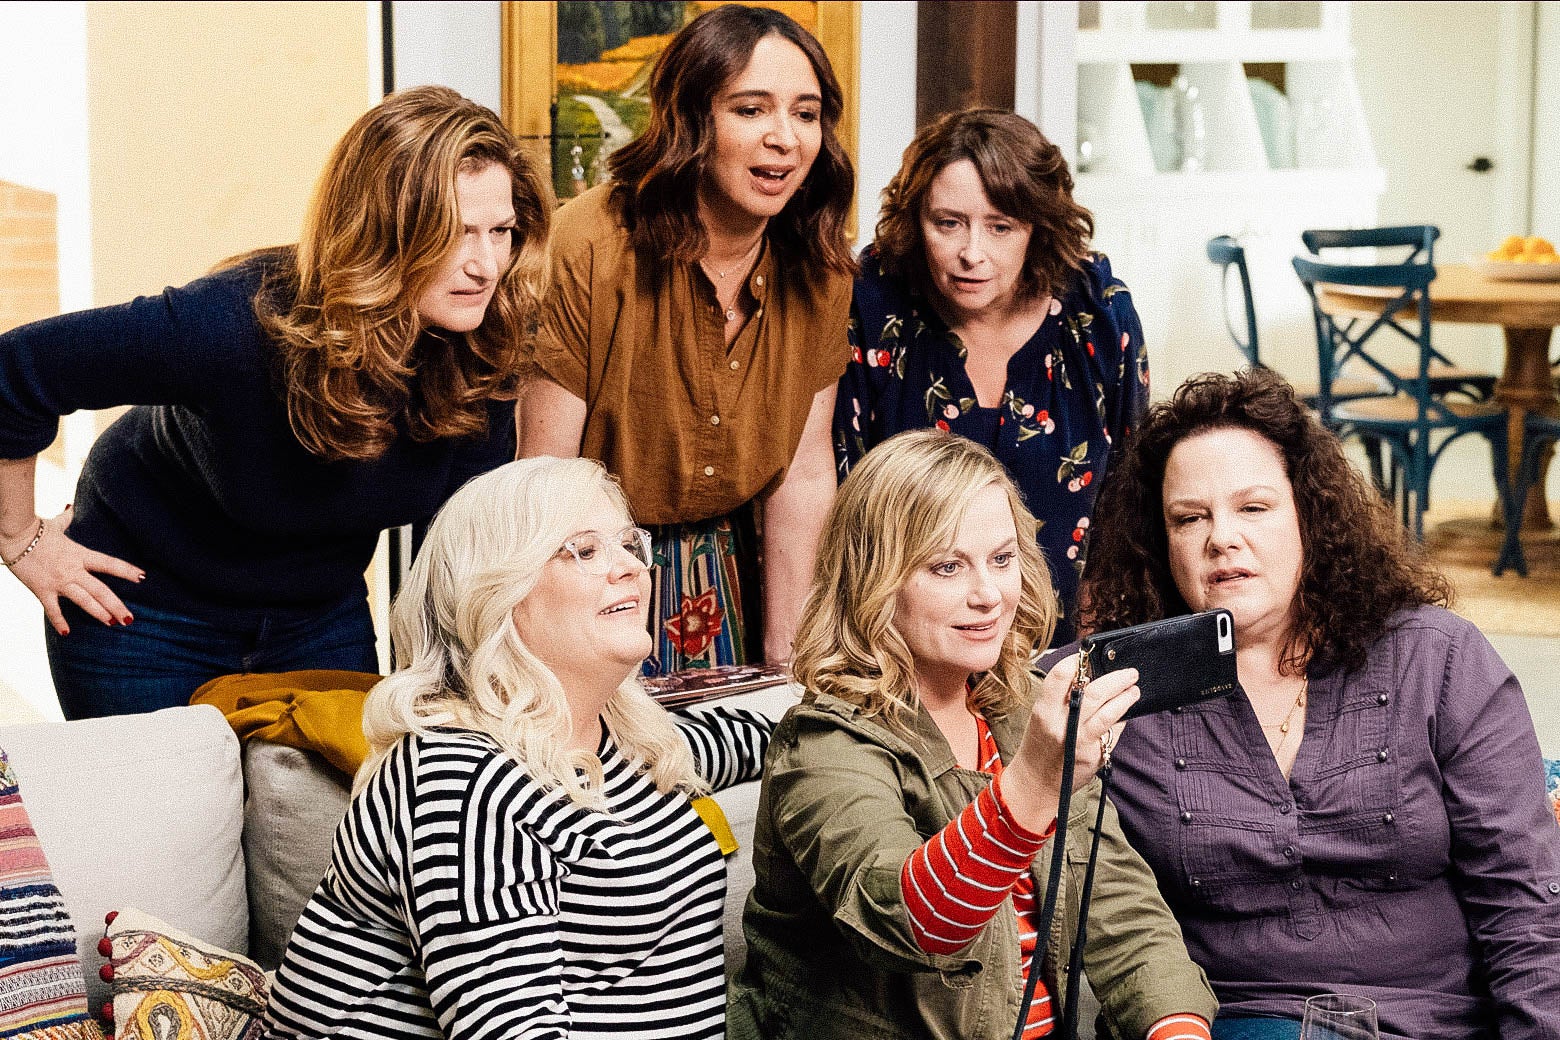 From top left: Ana Gasteyer, Maya Rudolph, Rachel Dratch, Paula Pell, Amy Poehler, and Emily Spivey mug for a selfie in this still from Wine Country.